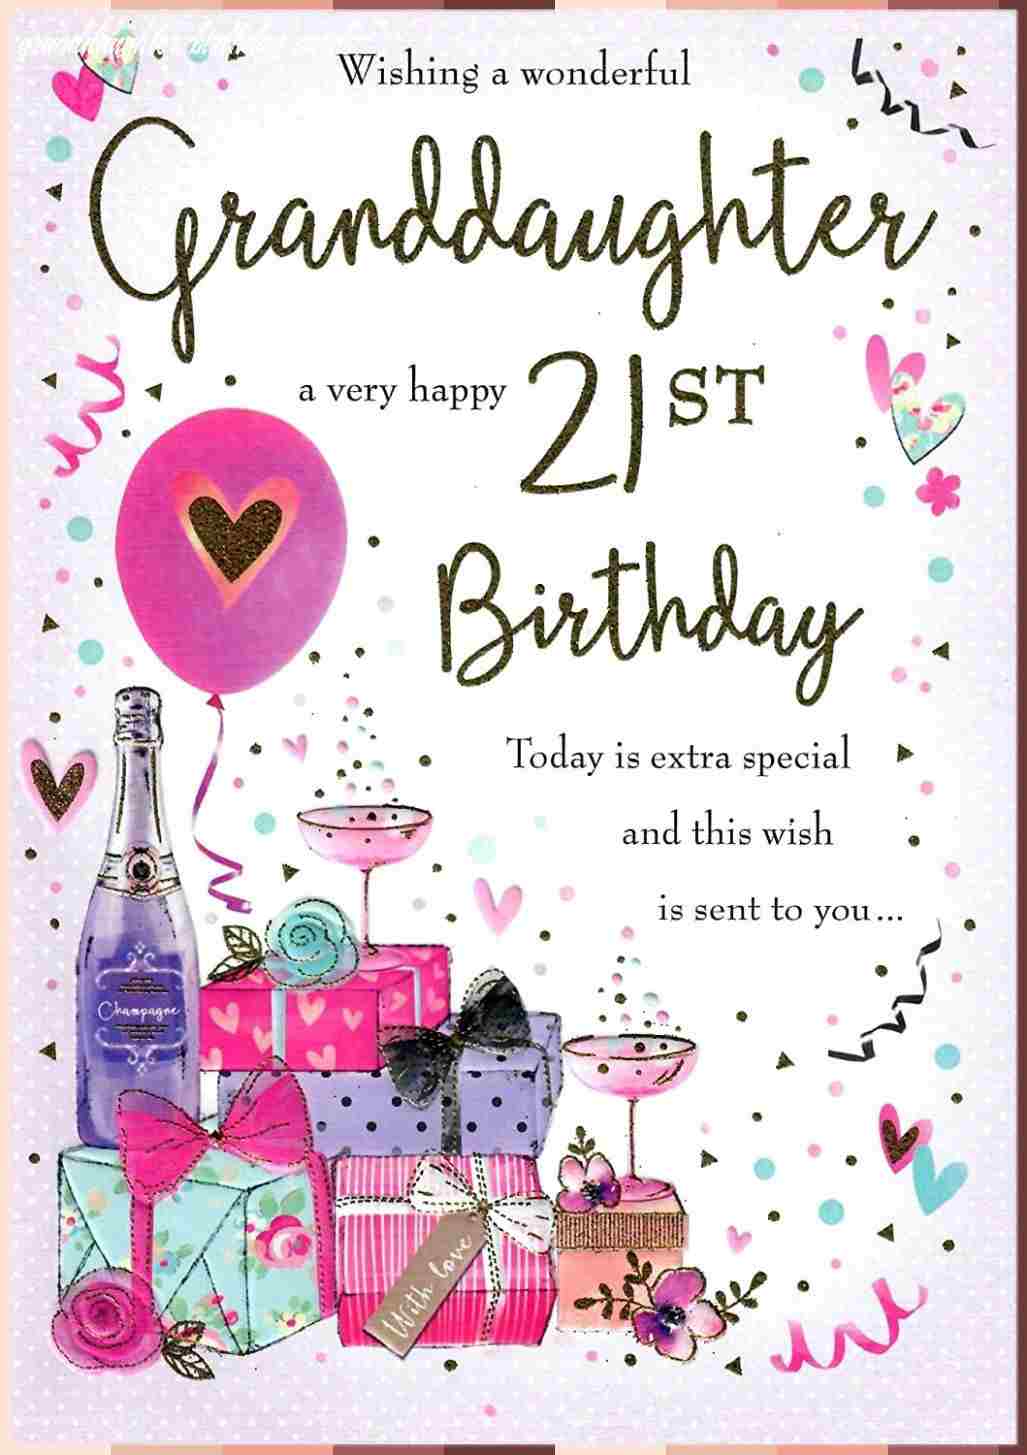 happy 21st birthday granddaughter images
